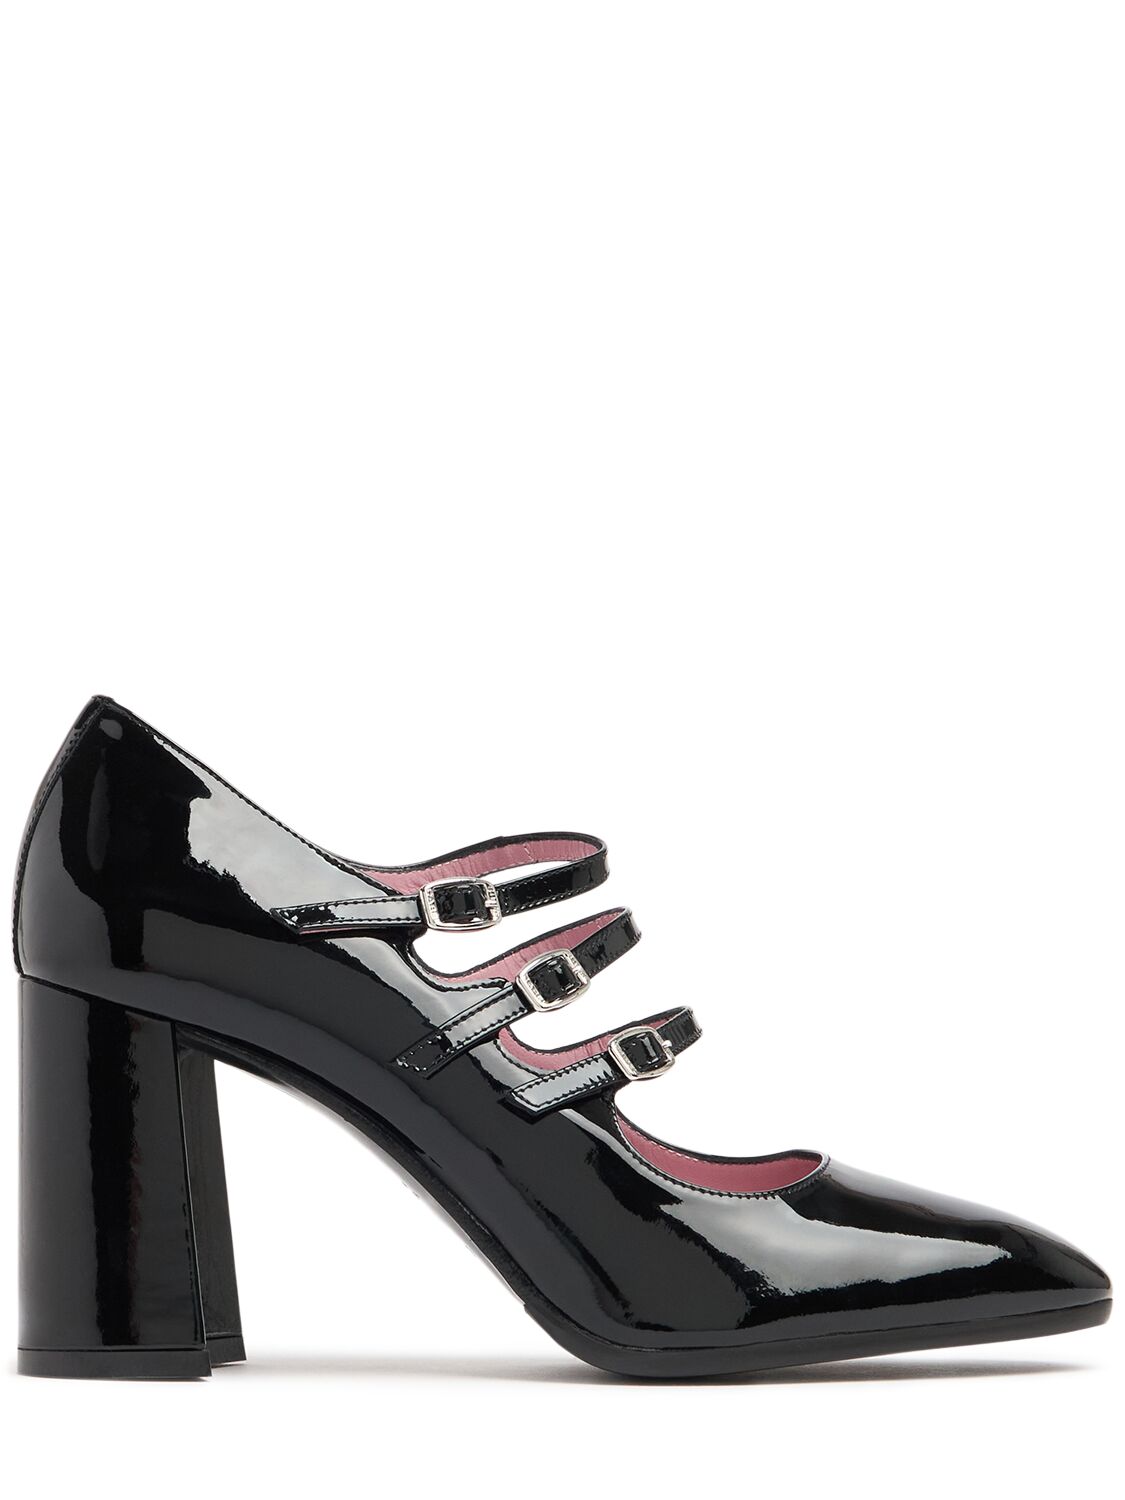 85mm Keel Patent Leather Pumps